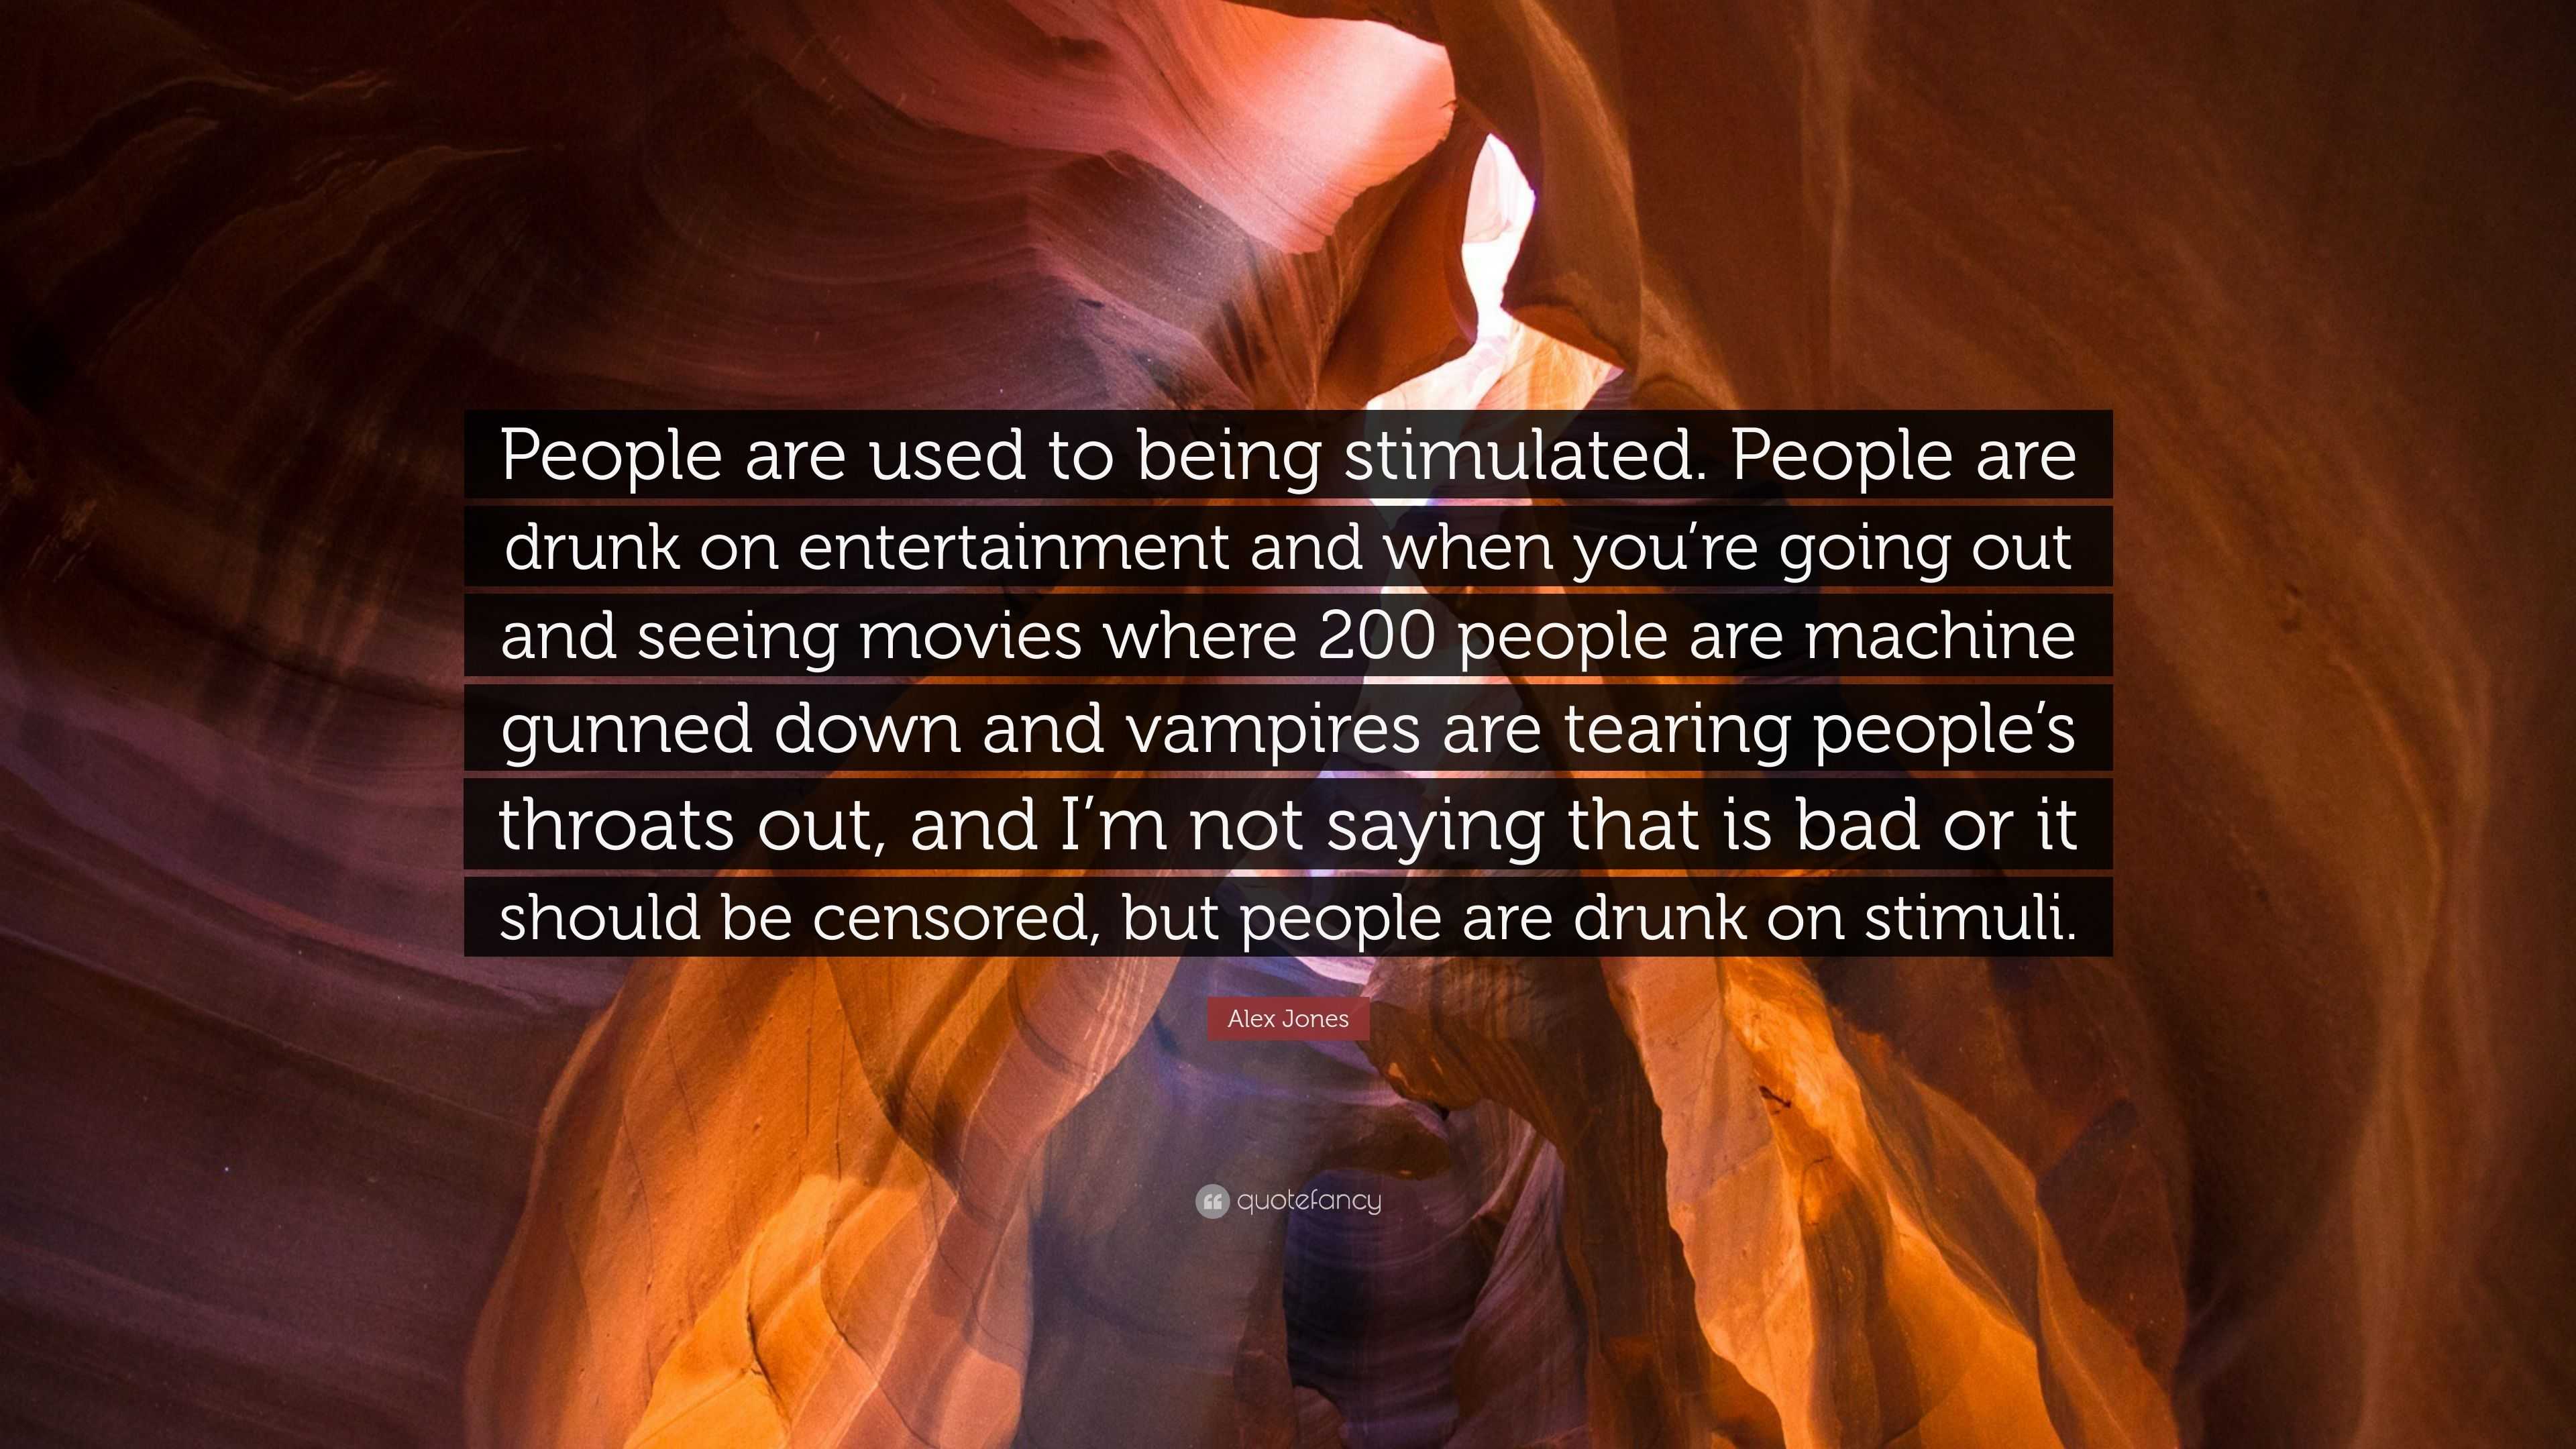 Alex Jones Quote: “People are used to being stimulated. People are